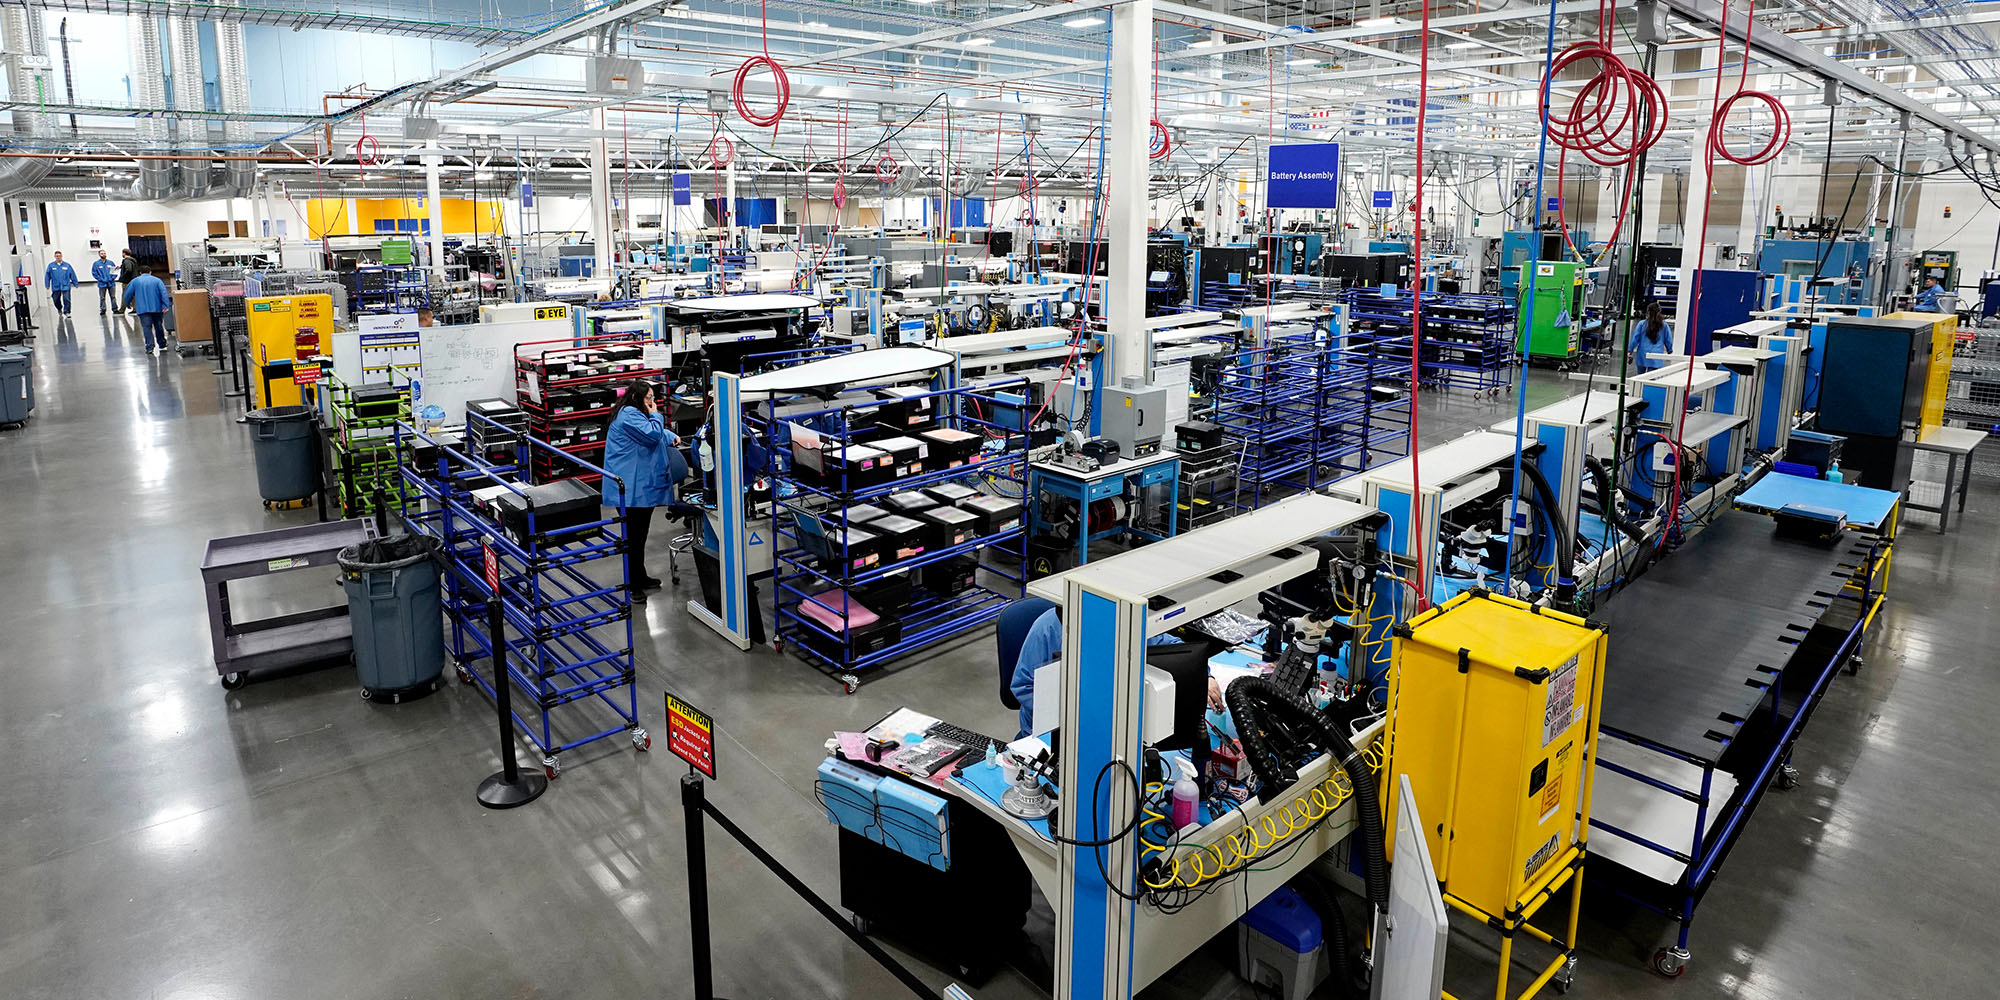 A large manufacturing plant floor with people in blue lab coats and large manufacturing machines